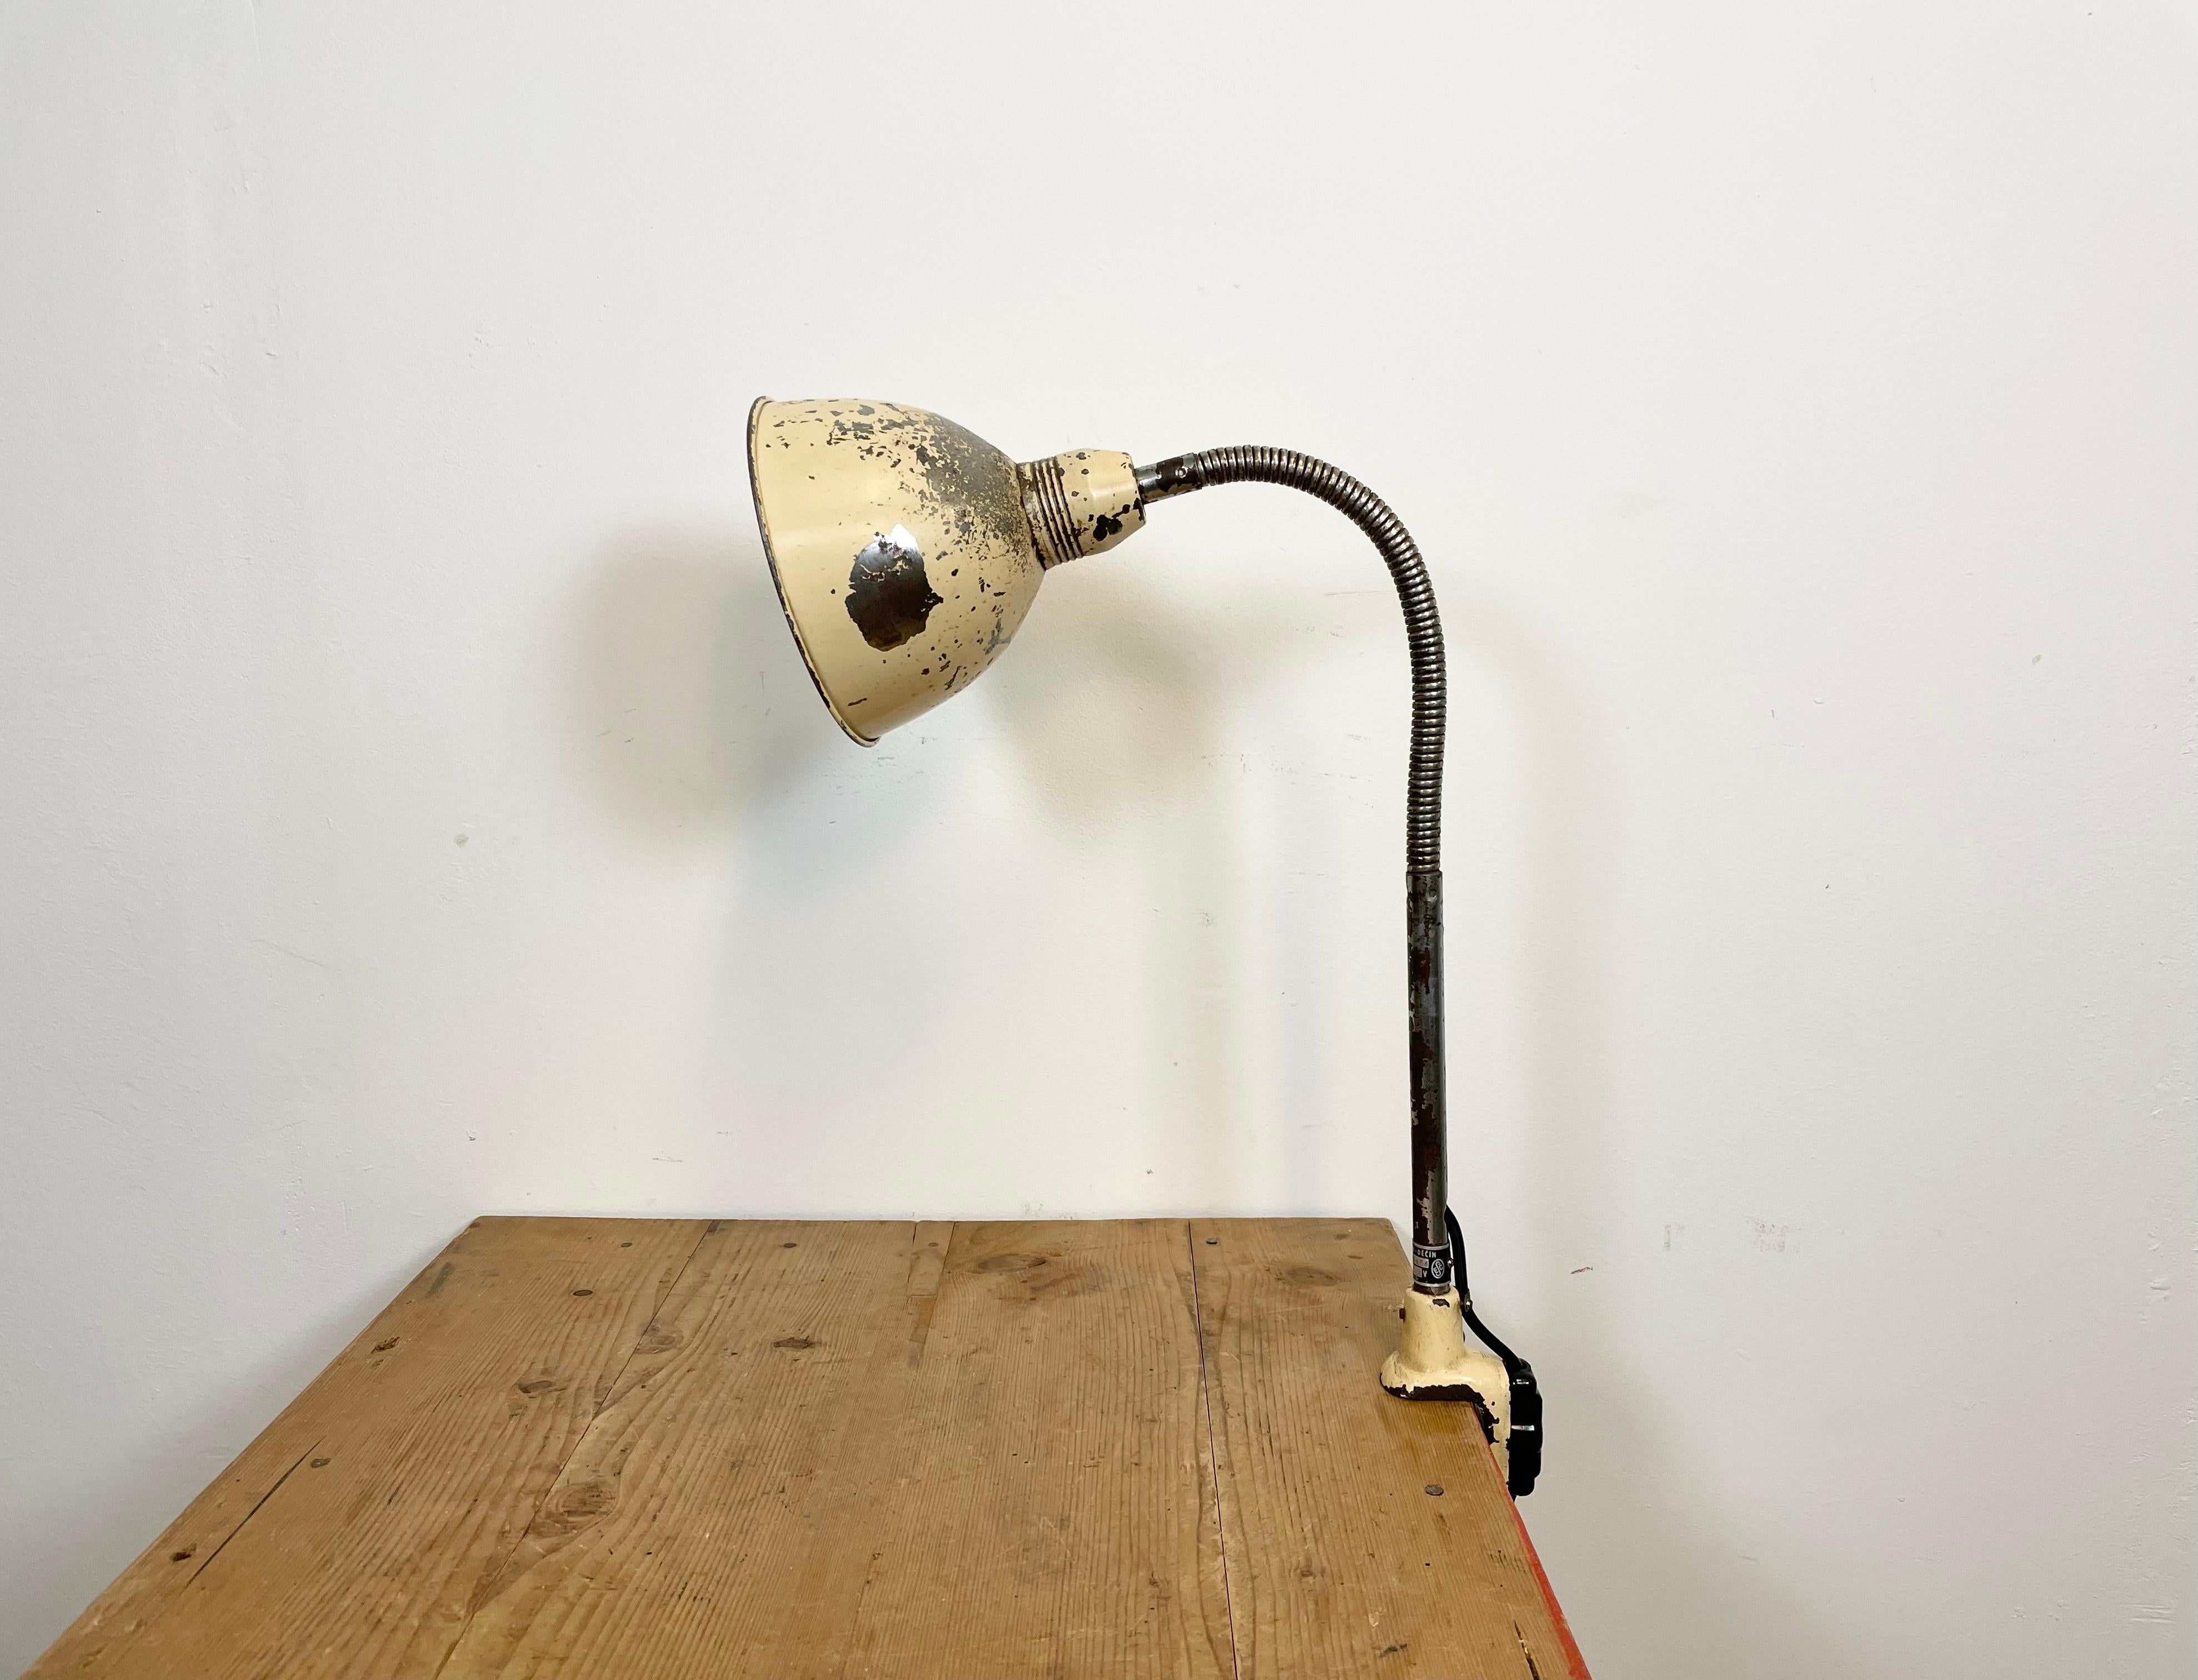 Industrial flexible gooseneck table lamp with clamp base made by Instala Decín in former Czechoslovakia during the 1960s. Good vintage condition. The socket requires standard E 27 / E26 light bulbs. The lampshade diameter is 17 cm.